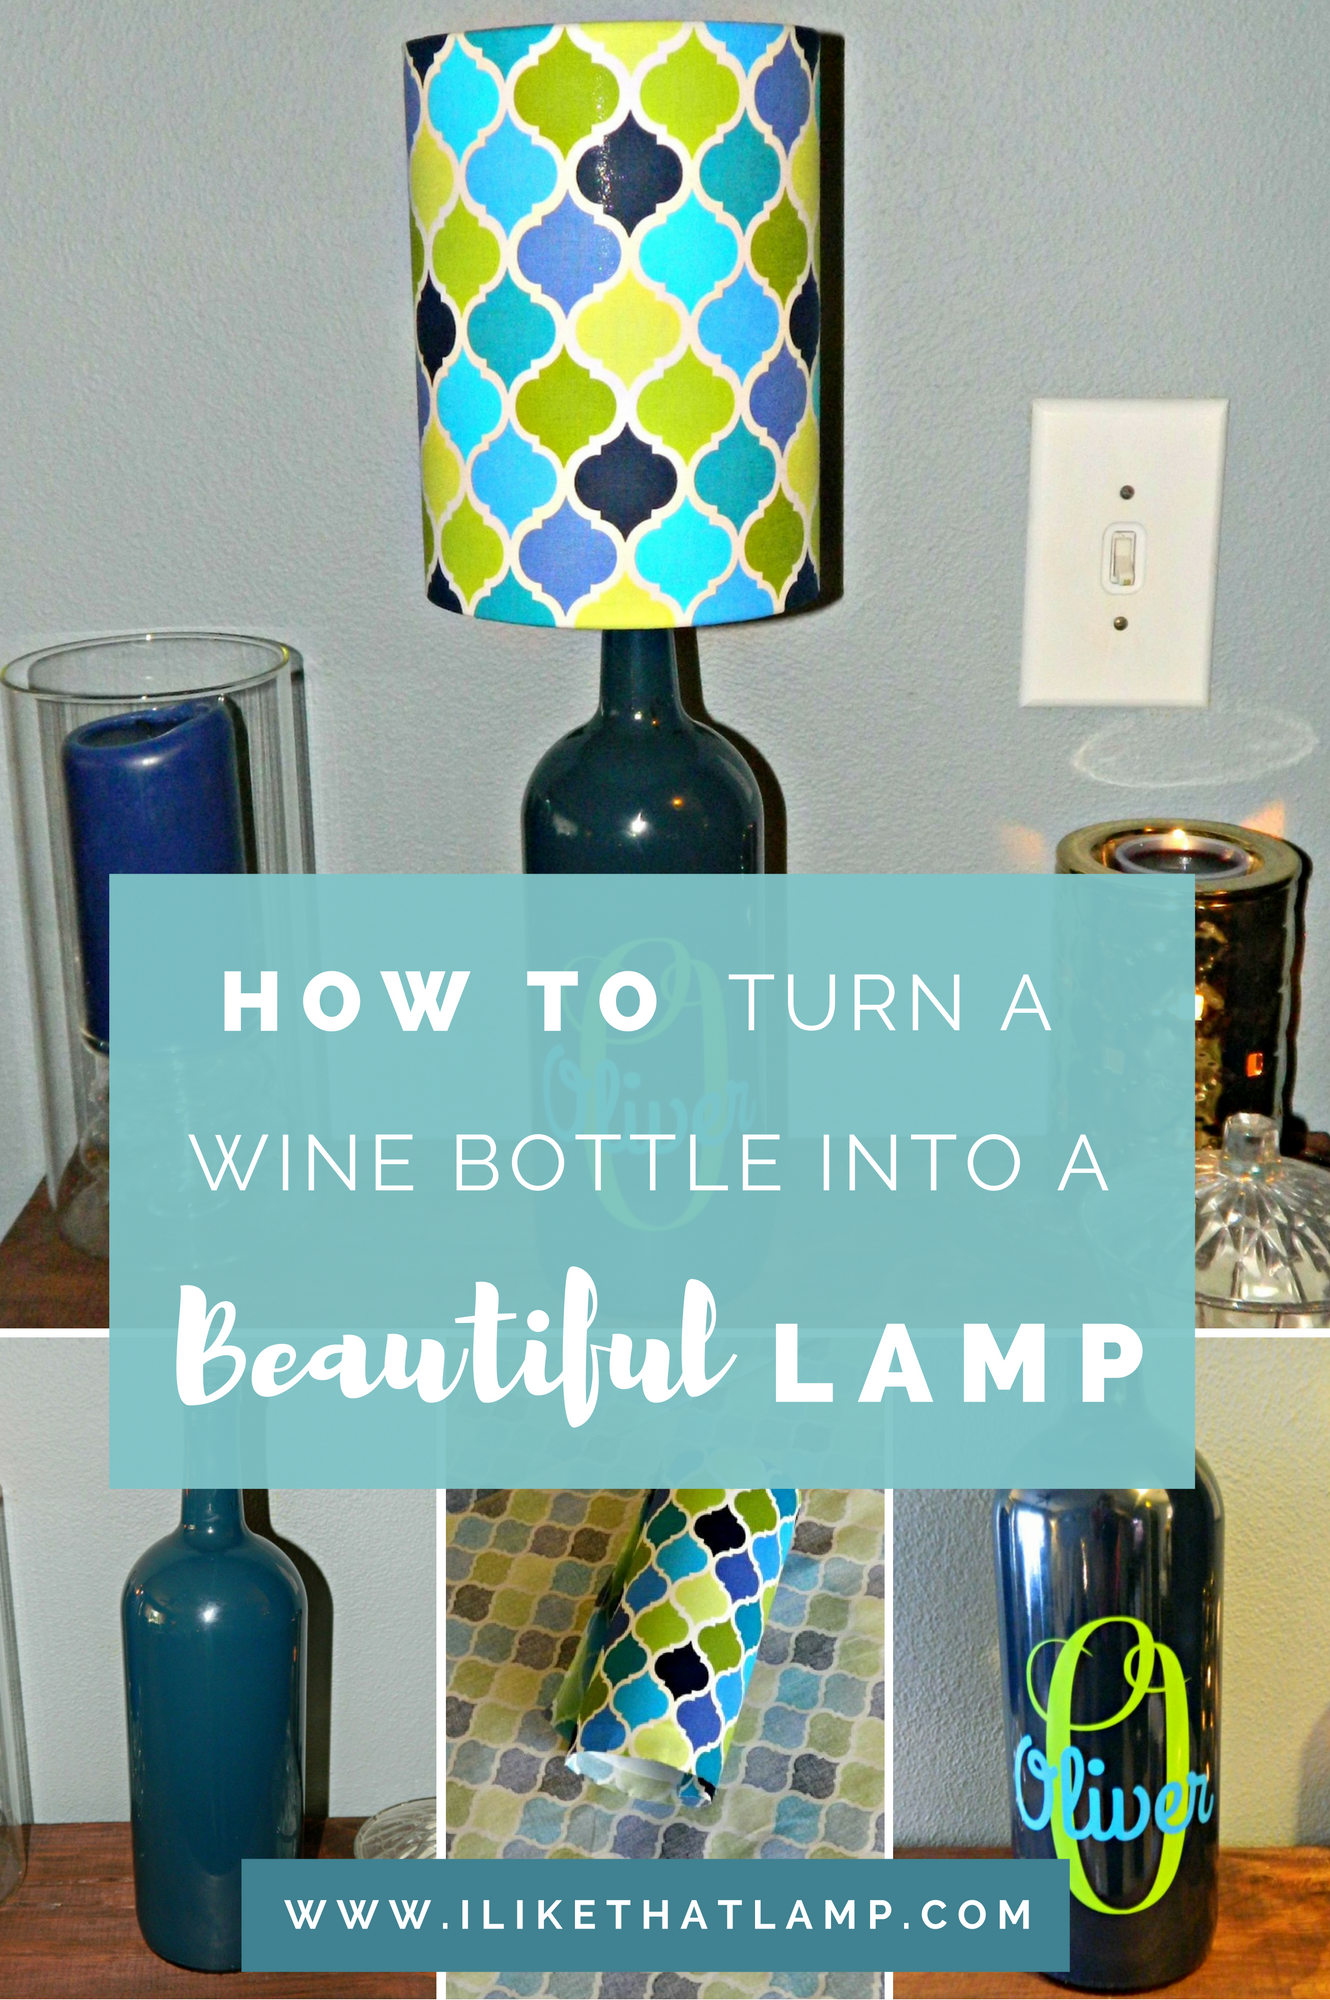 How to Make a Lamp Using a DIY Lamp Kit - I Like That Lamp - Makely